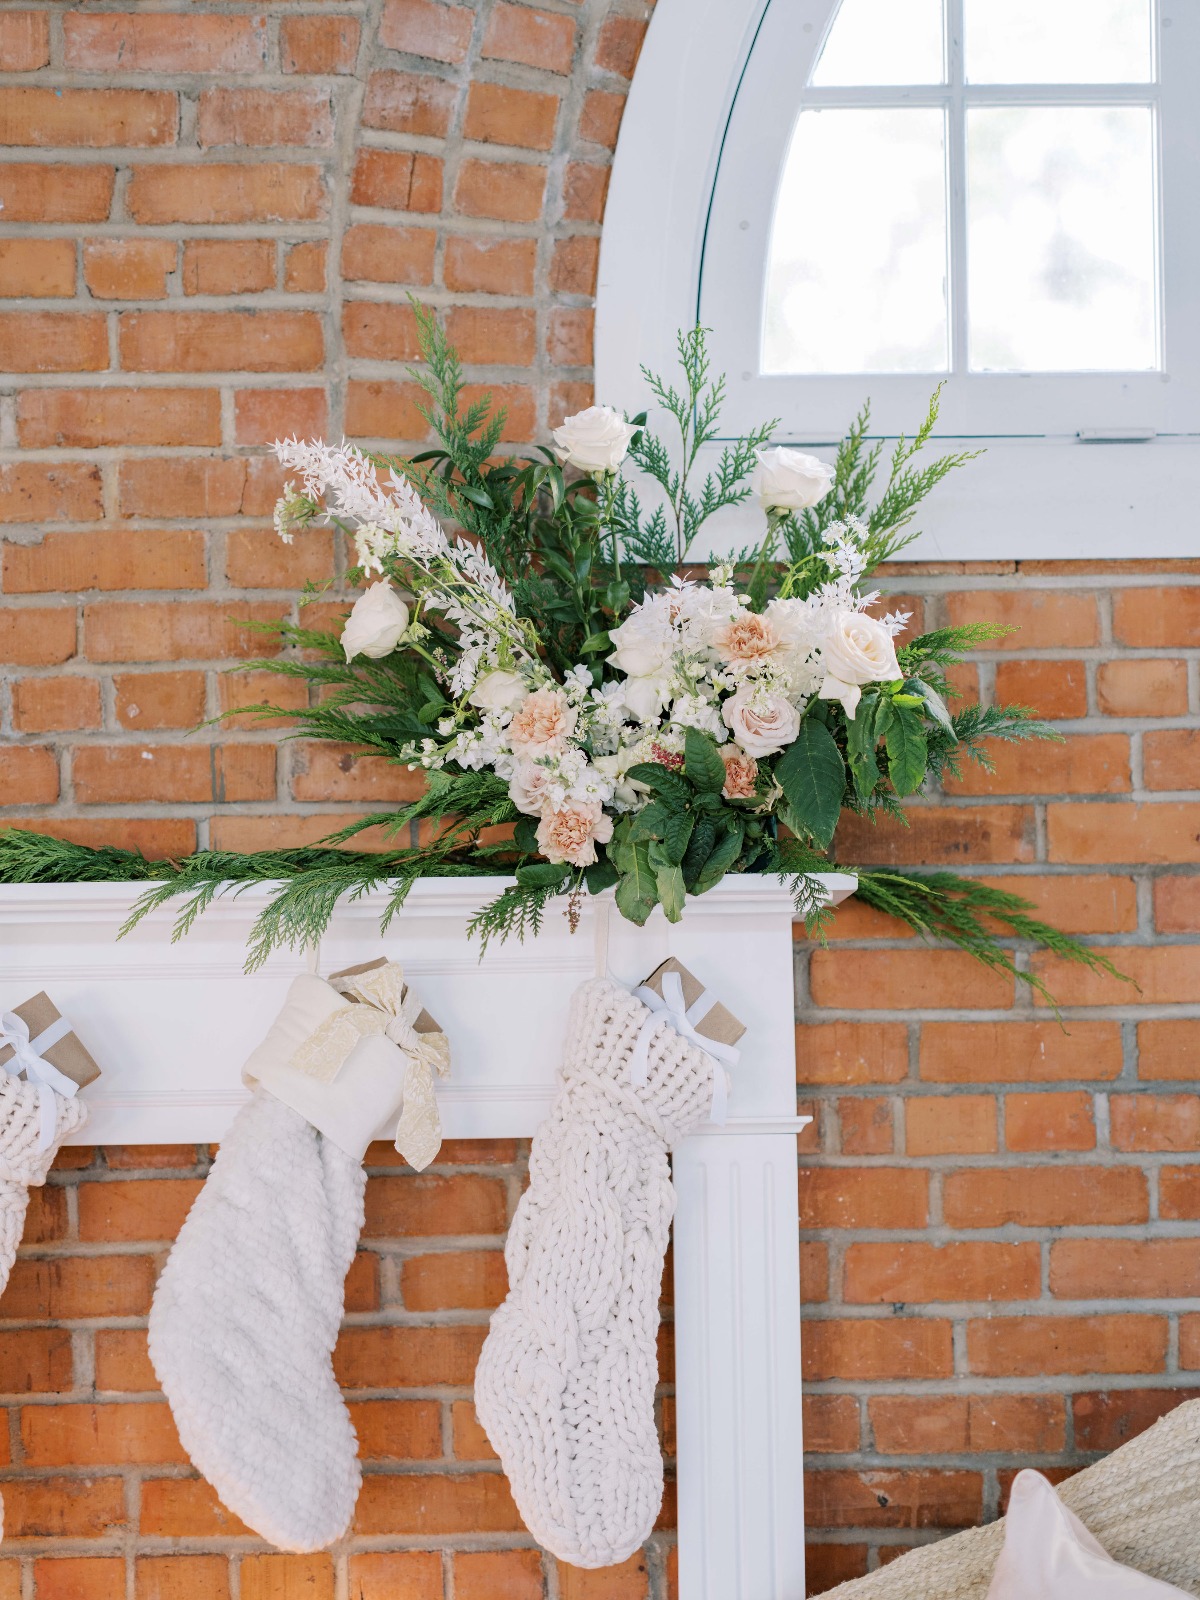 Snow Place Like Home  Styled Shoot